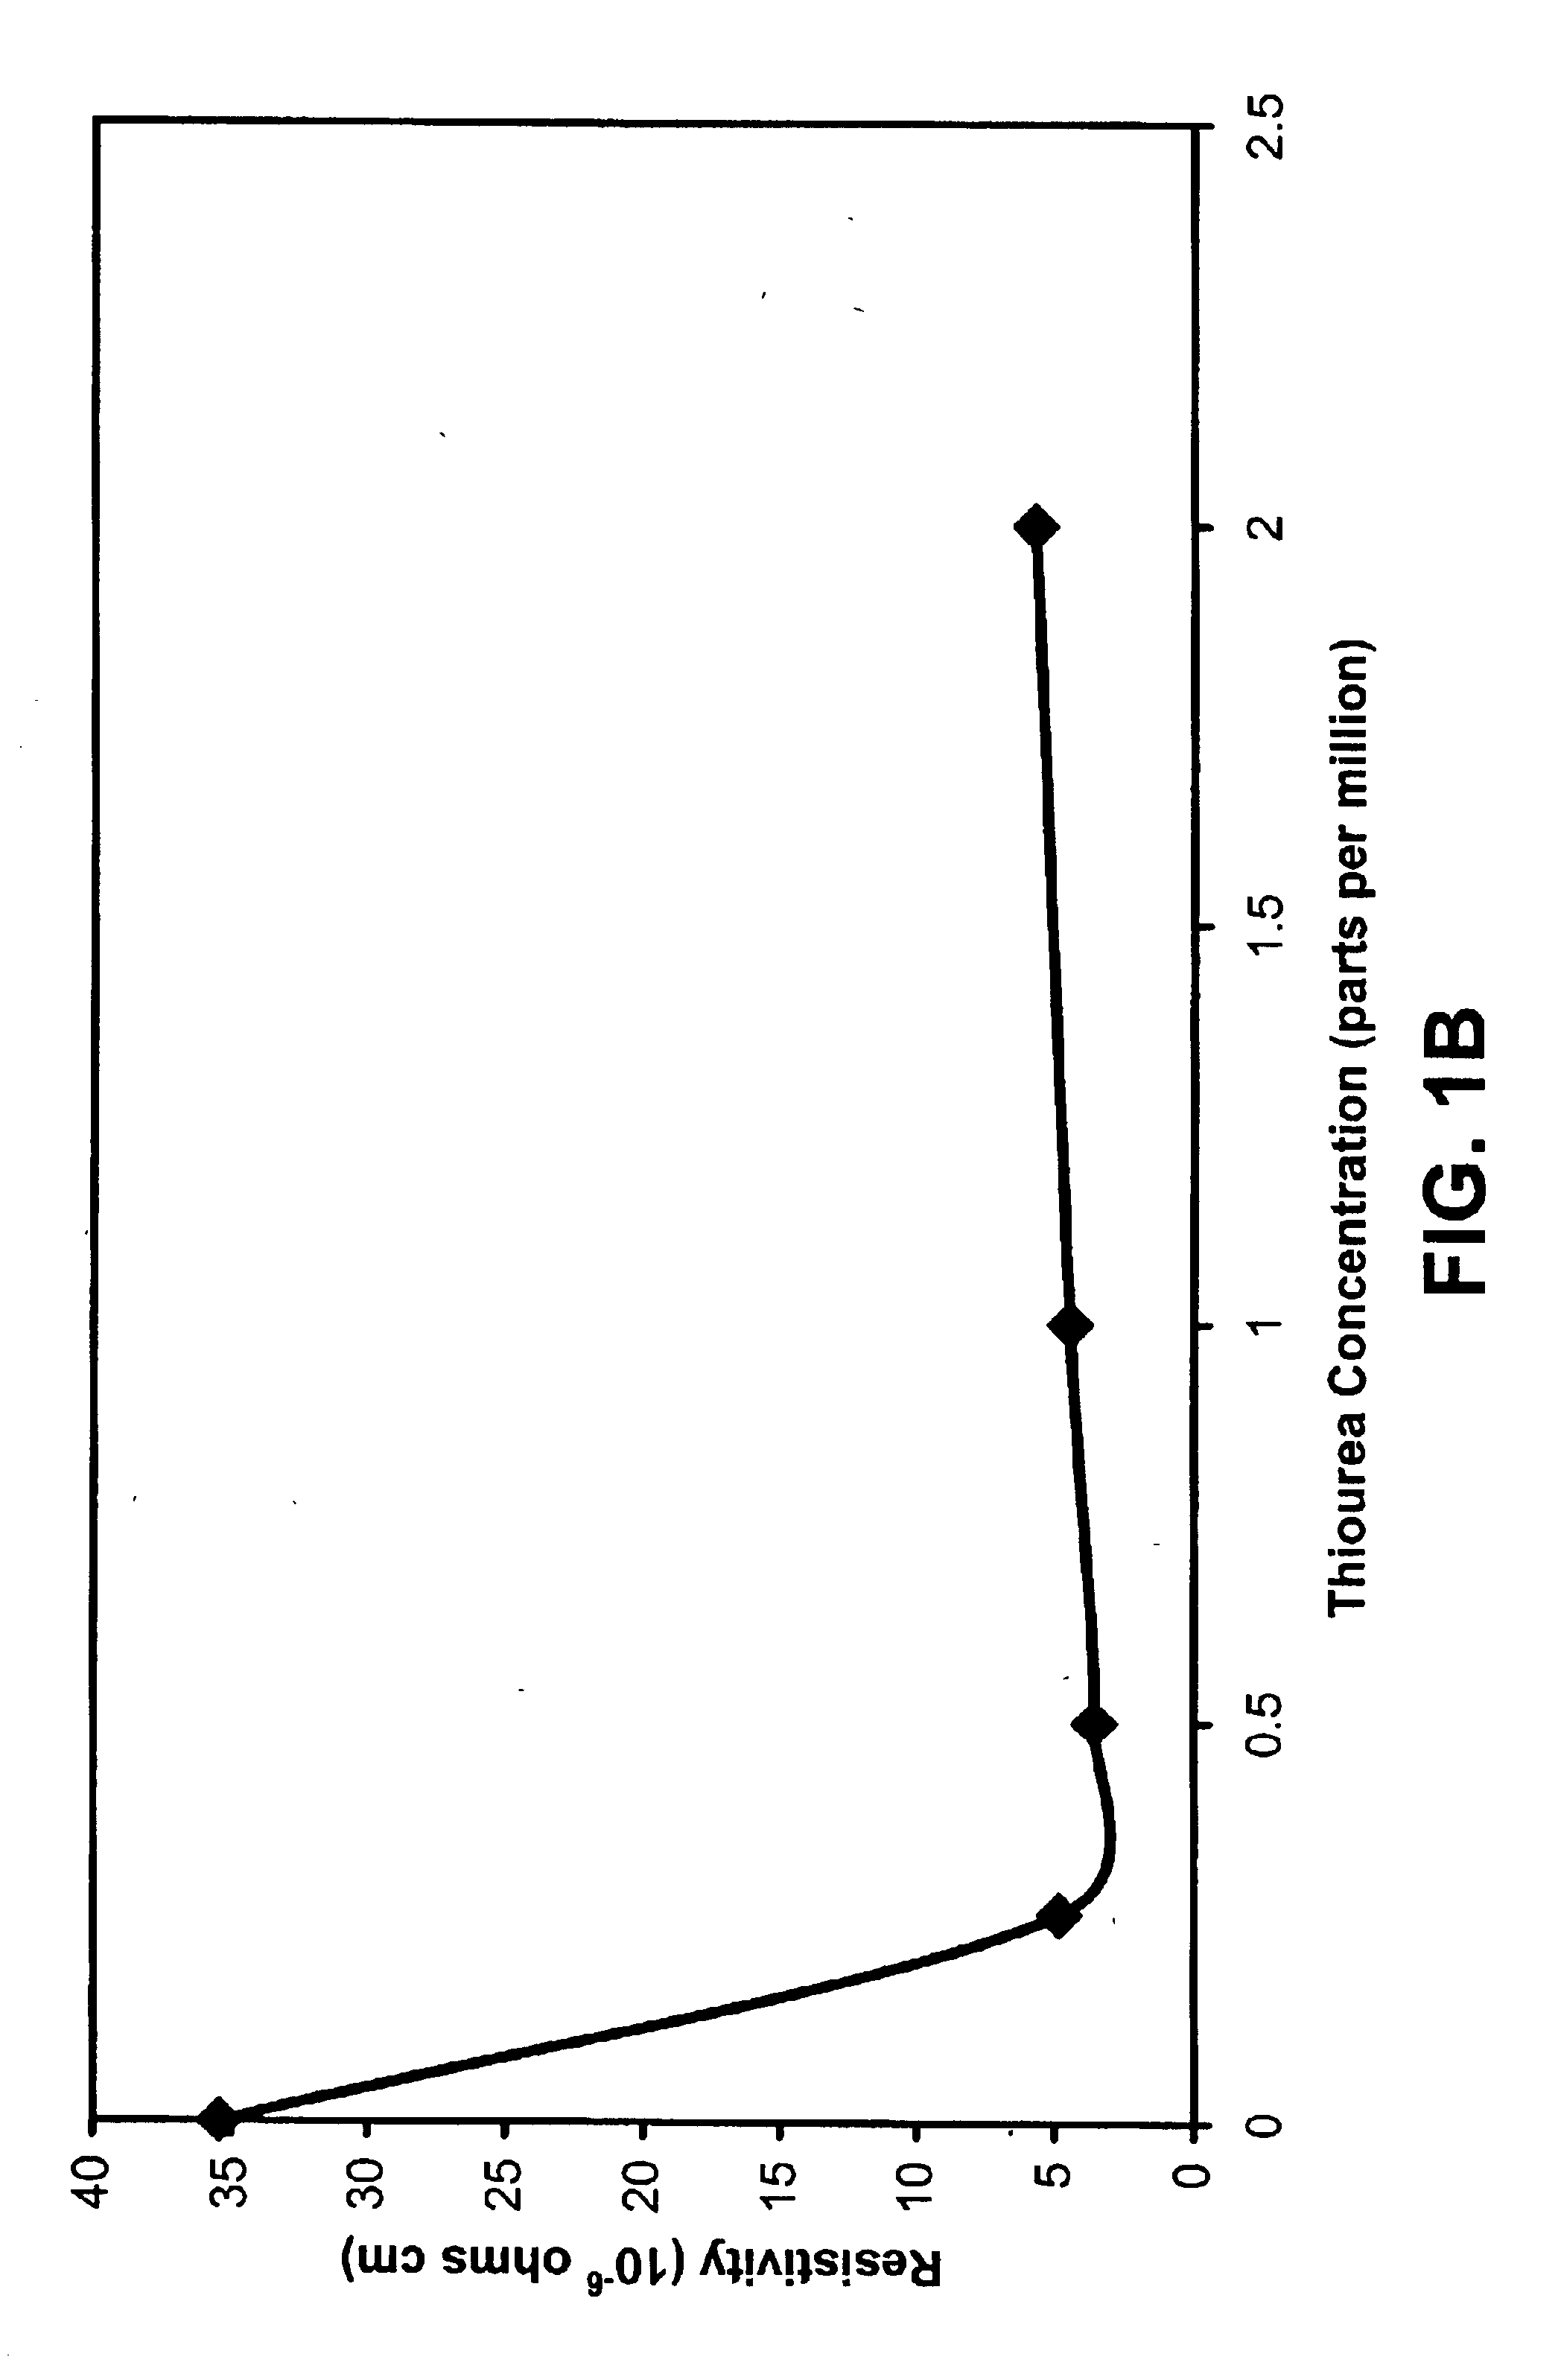 Electroless copper plating solutions and methods of use thereof